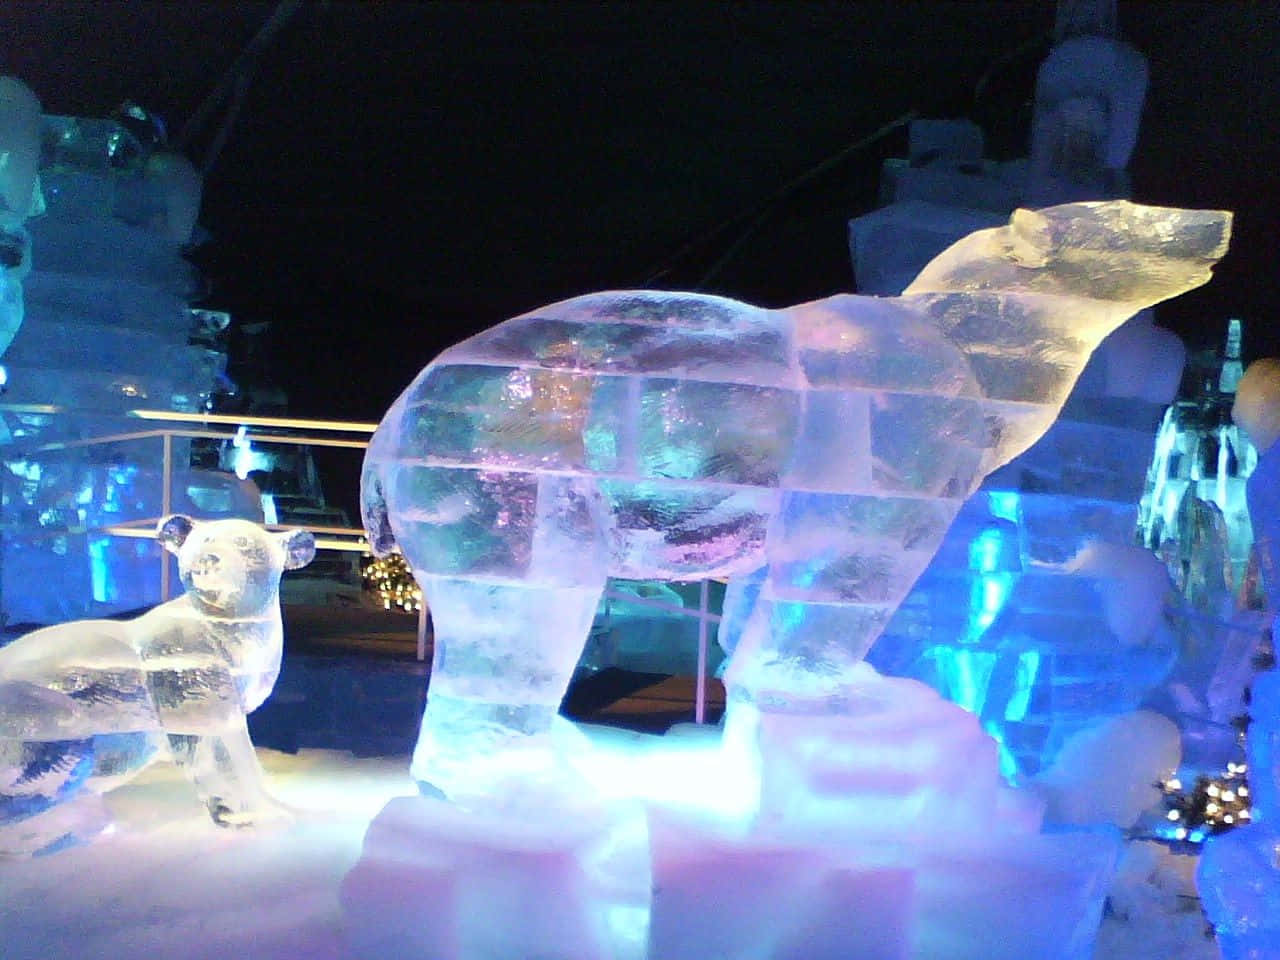 Caption: Majestic Ice Sculpture - Intricate Artistry on Display Wallpaper